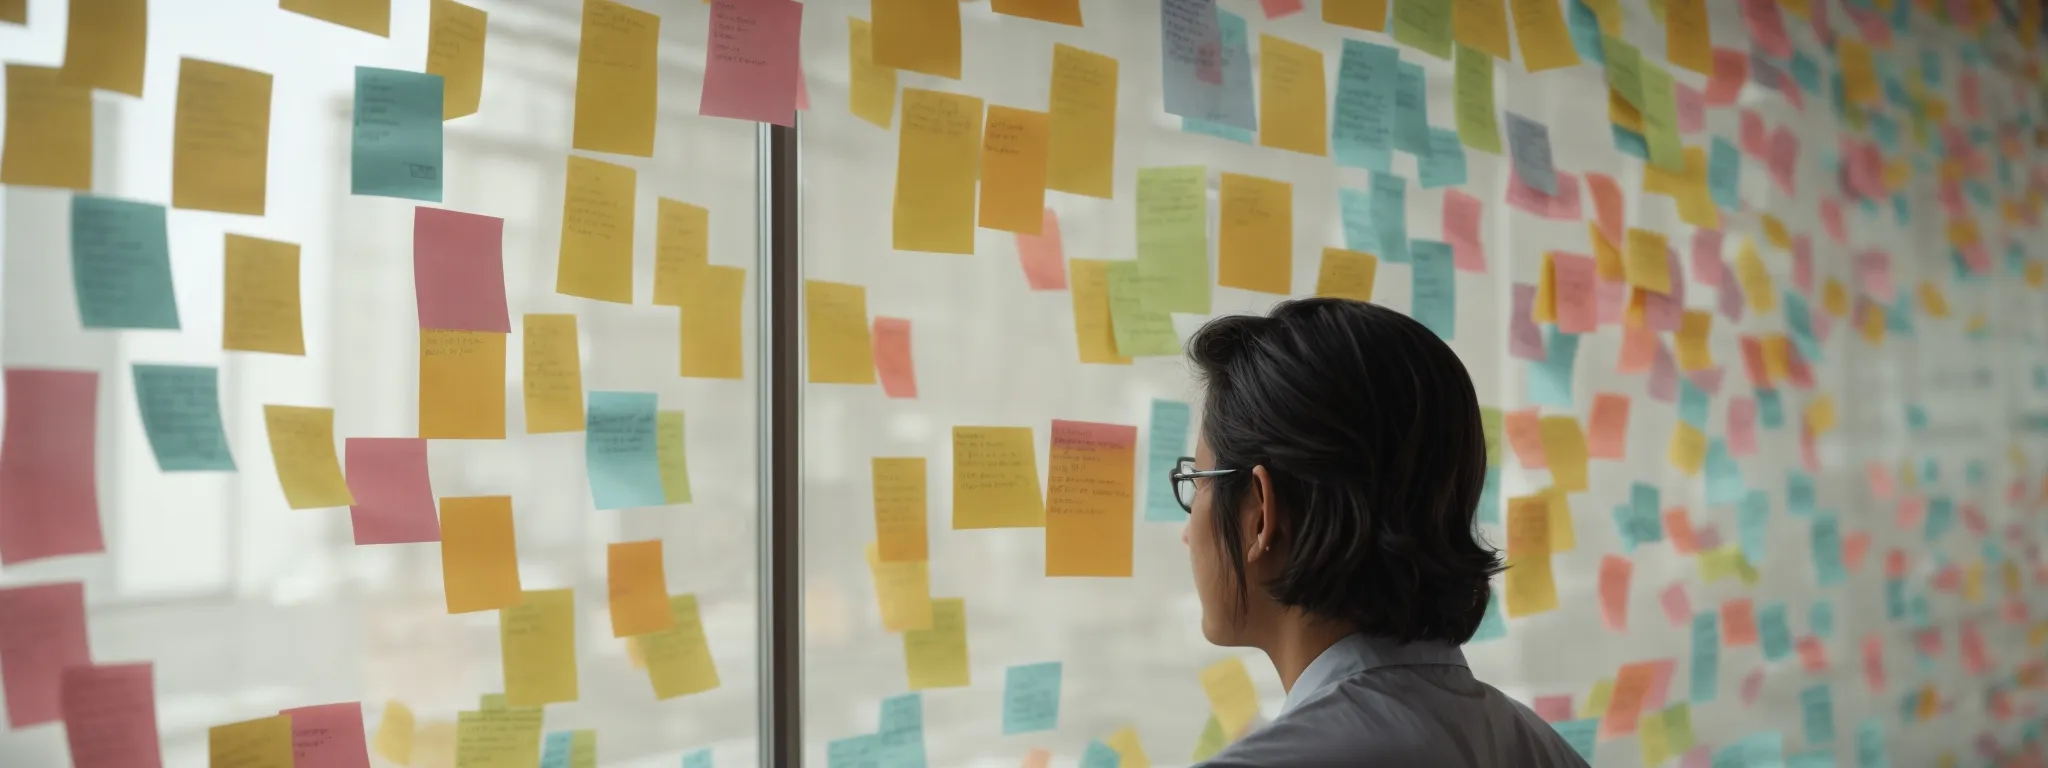 a person brainstorming with colorful sticky notes on a glass wall to strategize seo keyword research.